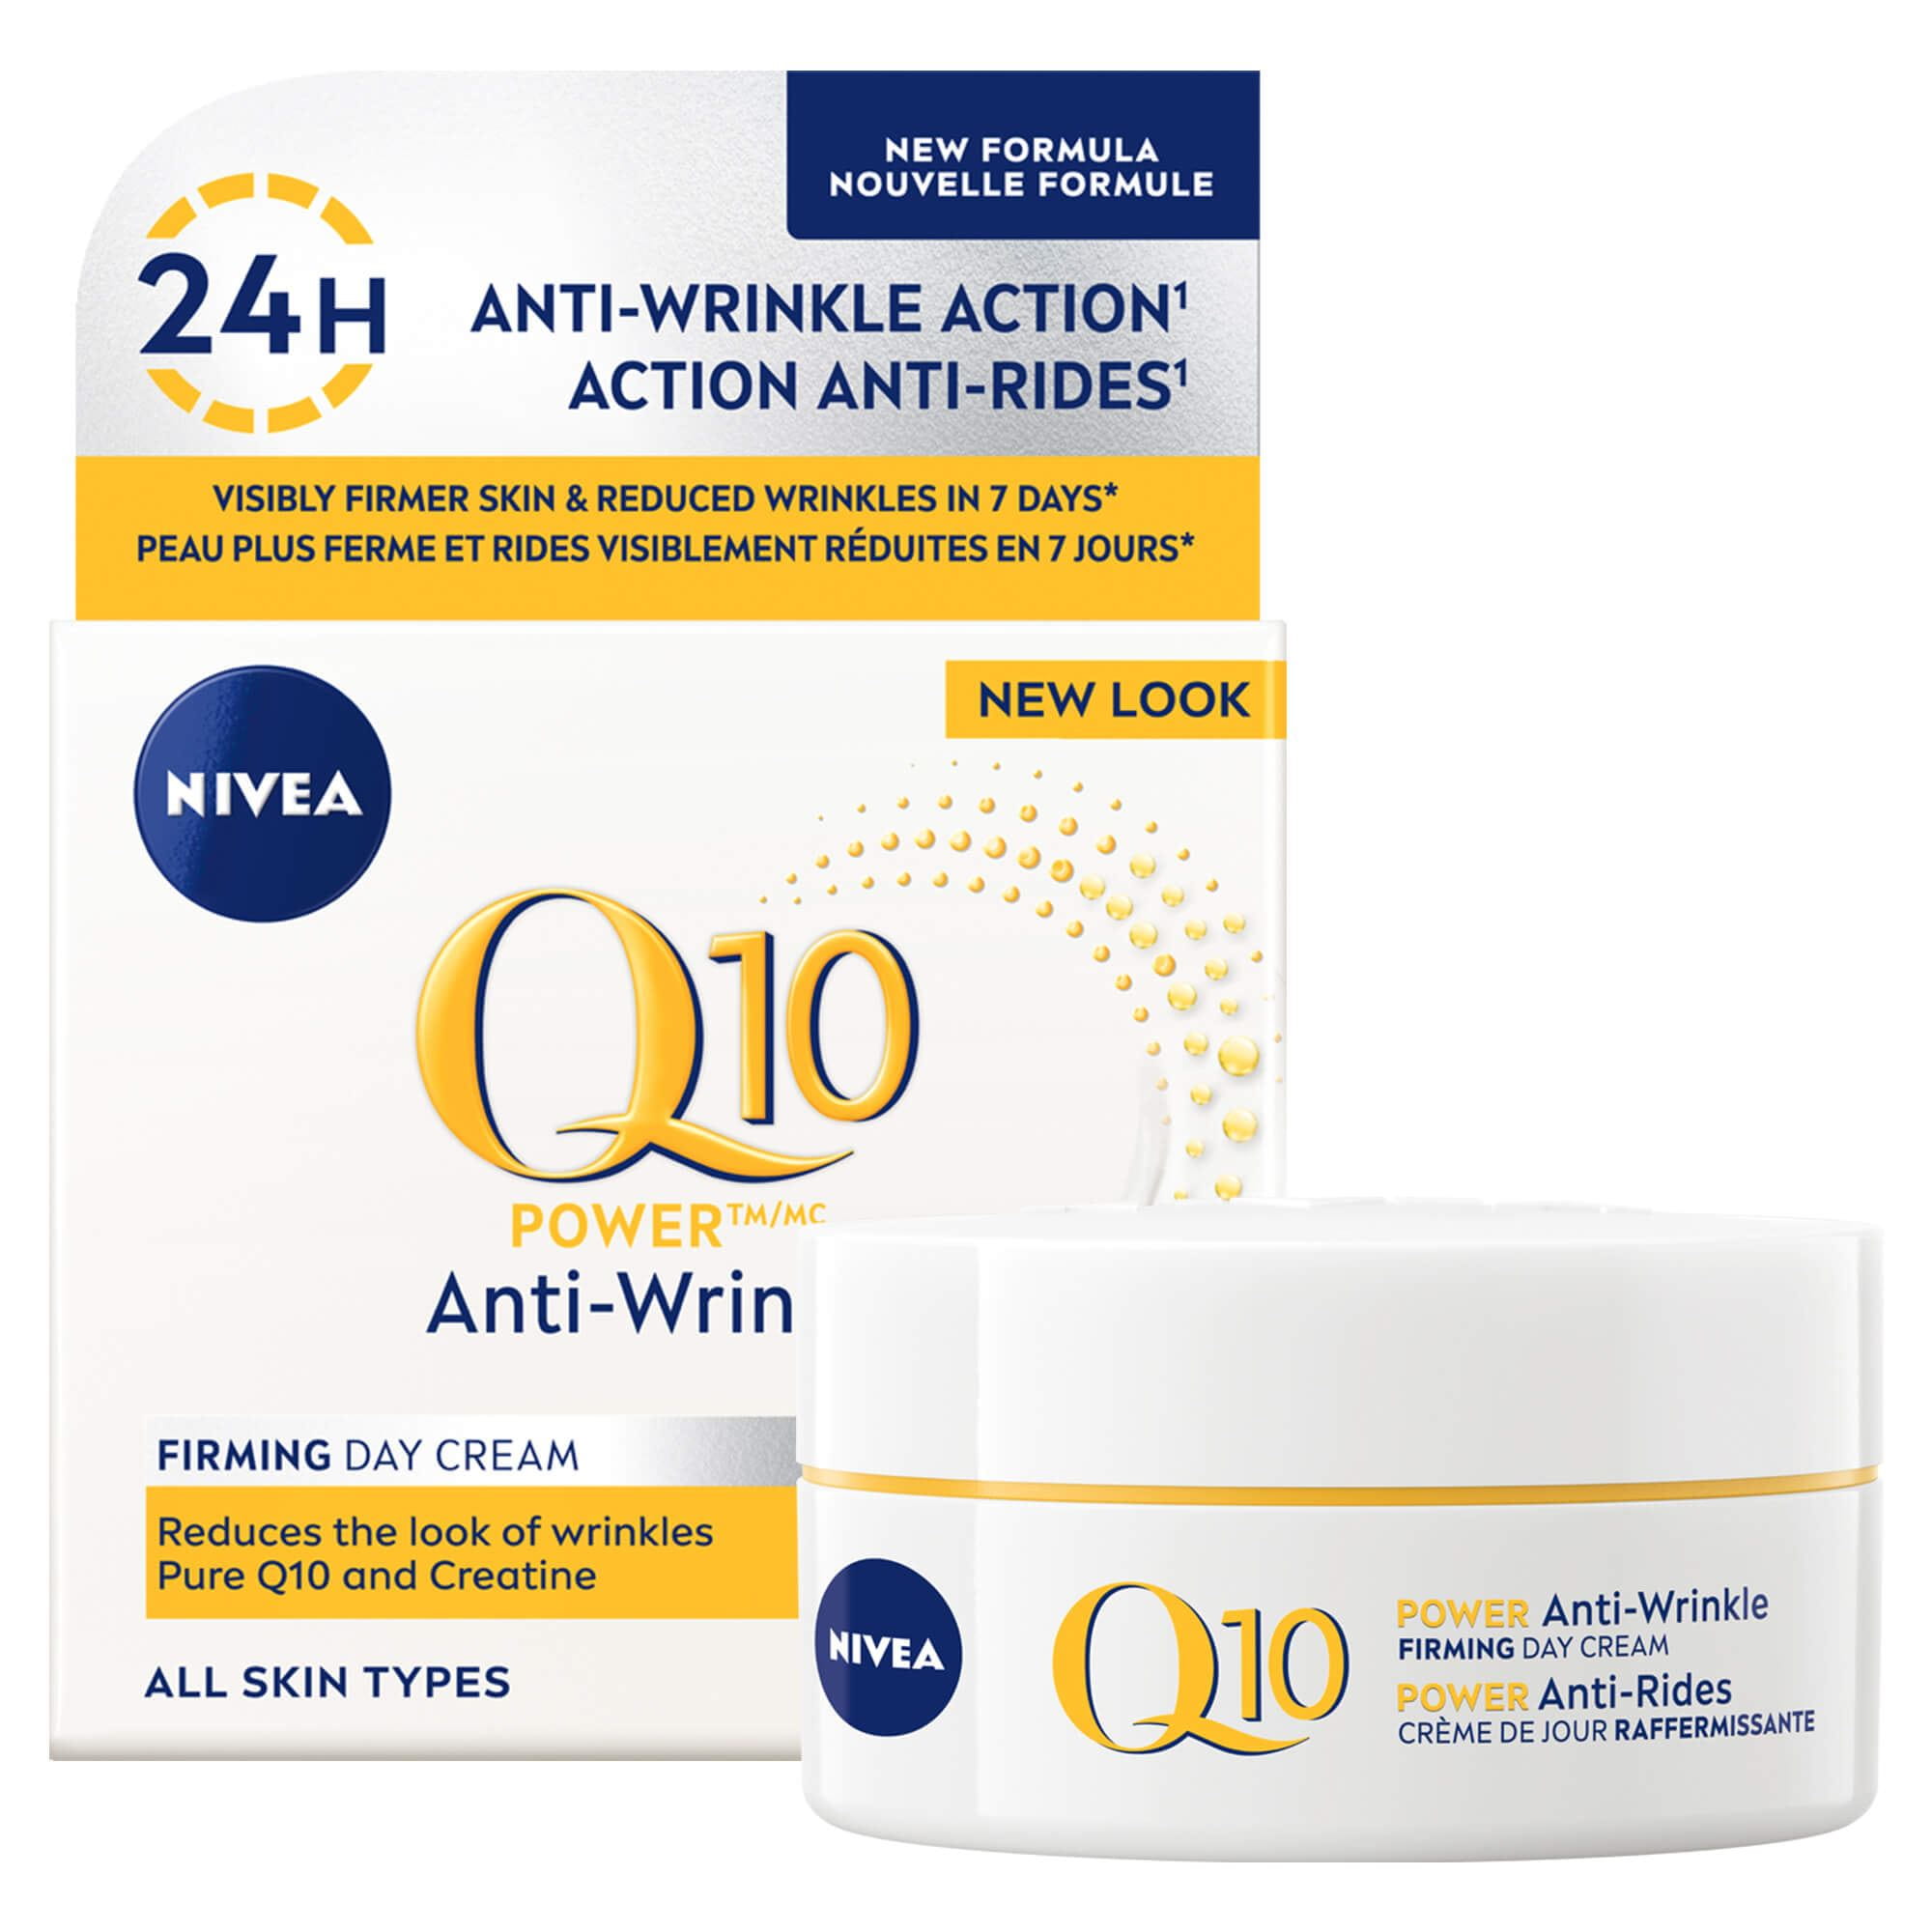 View of the Nivea NIVEA Q10 POWER ANTI-WRINKLE FIRMING DAY CREAM SPF 30 product against a white background with the box shown behind the product.